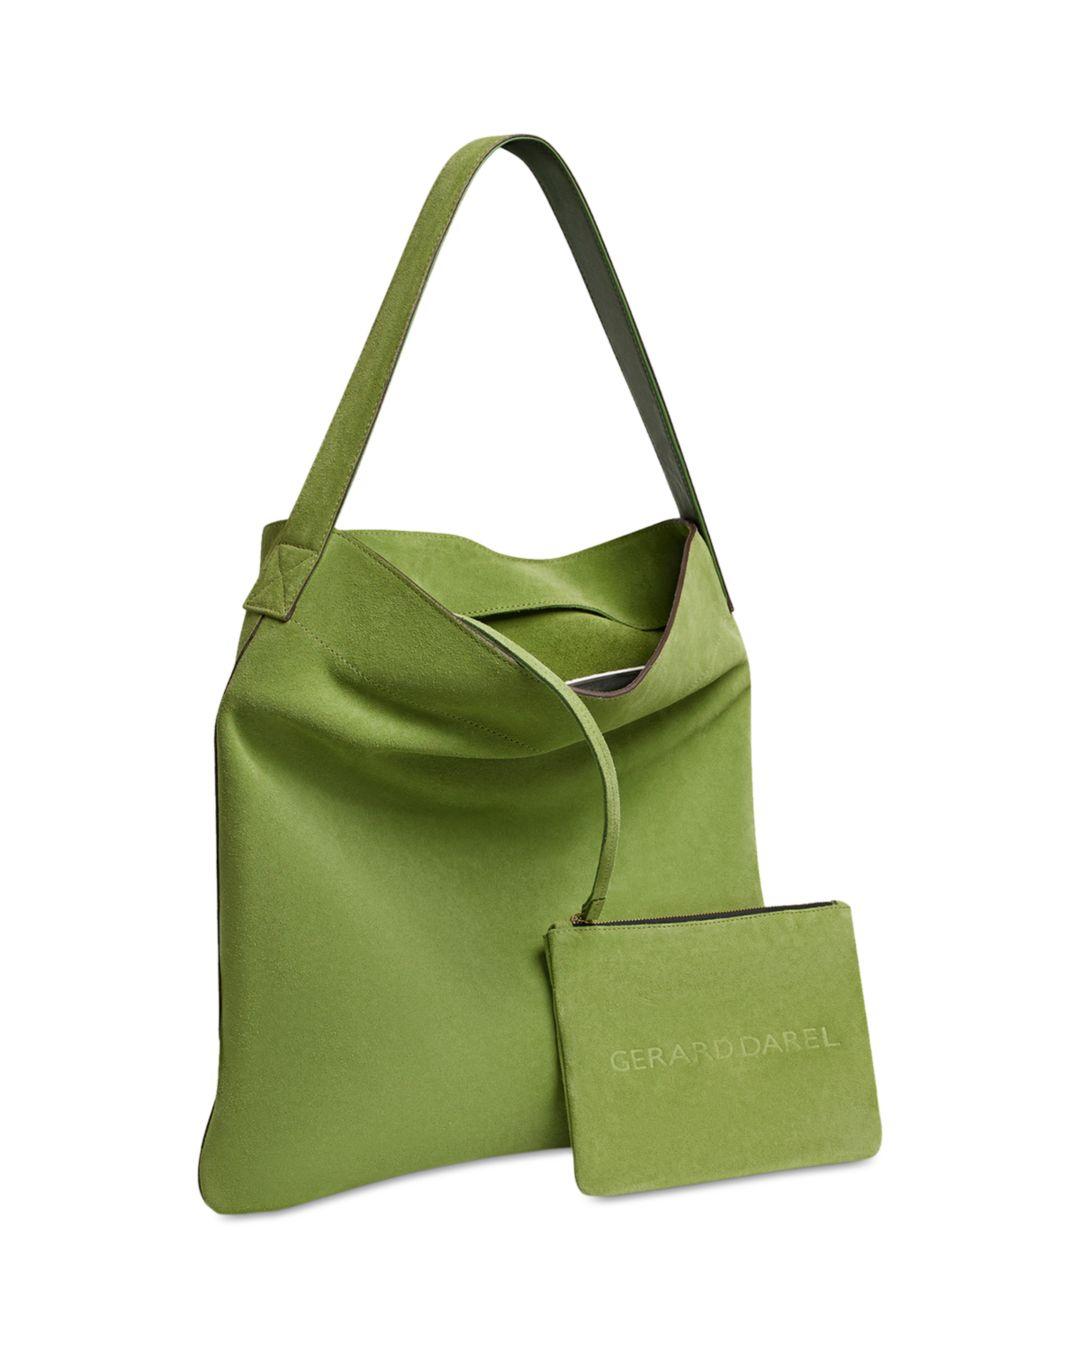 Gerard Darel Lady Leather Hobo Bag W/ Removable Pouch in Green | Lyst